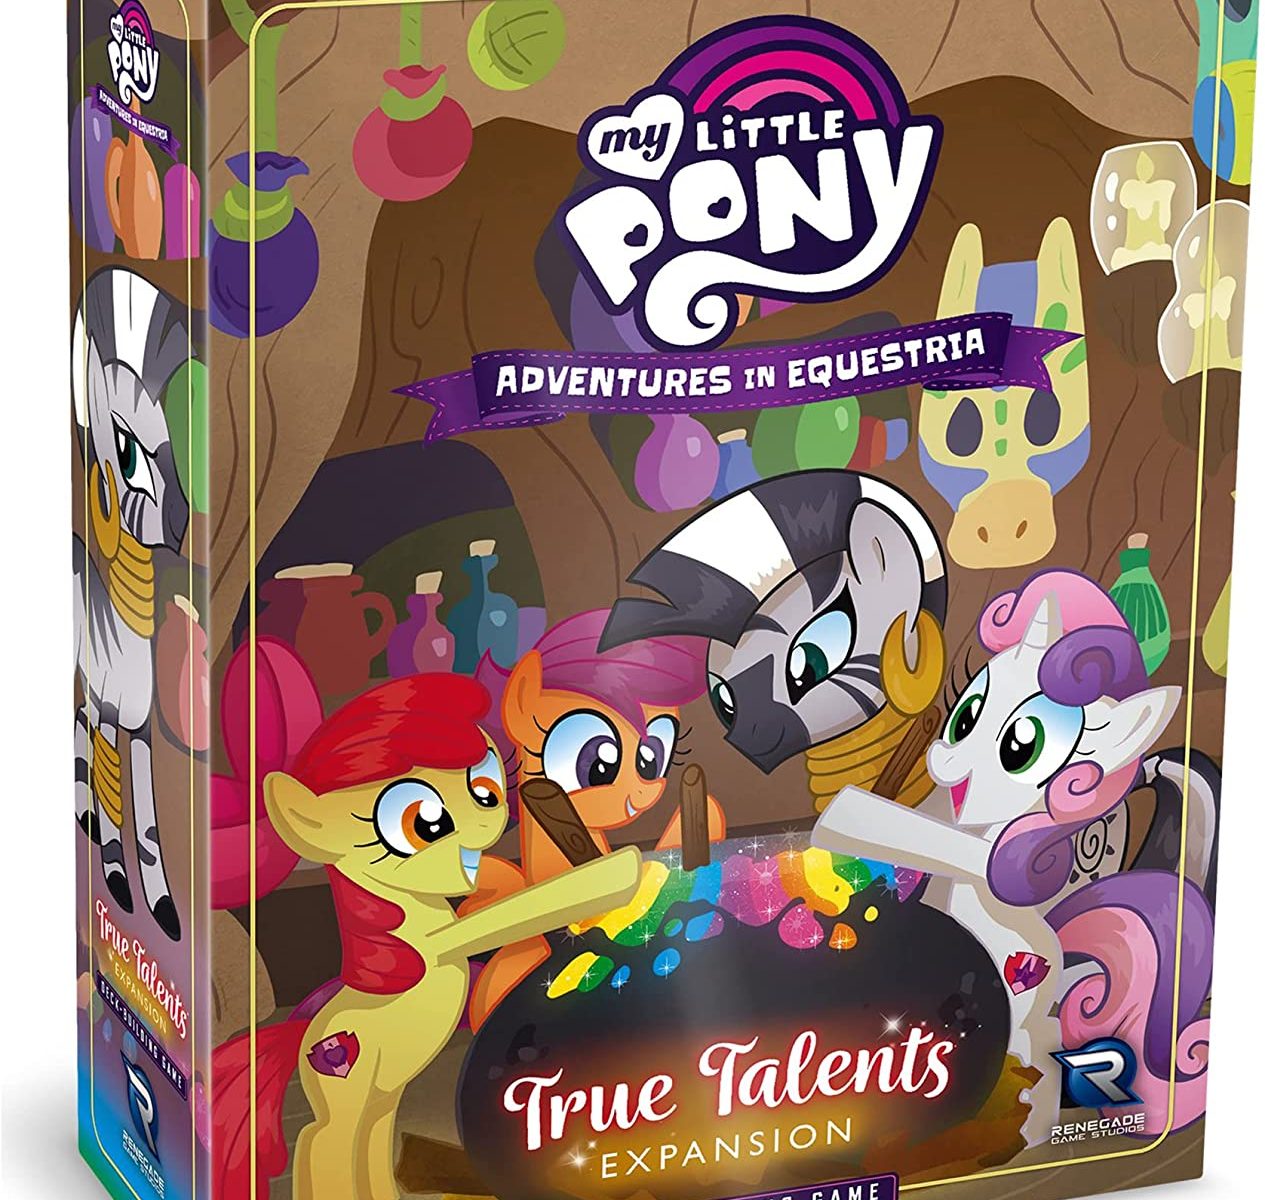 MLP Adventures in Equestria True Talents Expansion Deck-Building Game 1